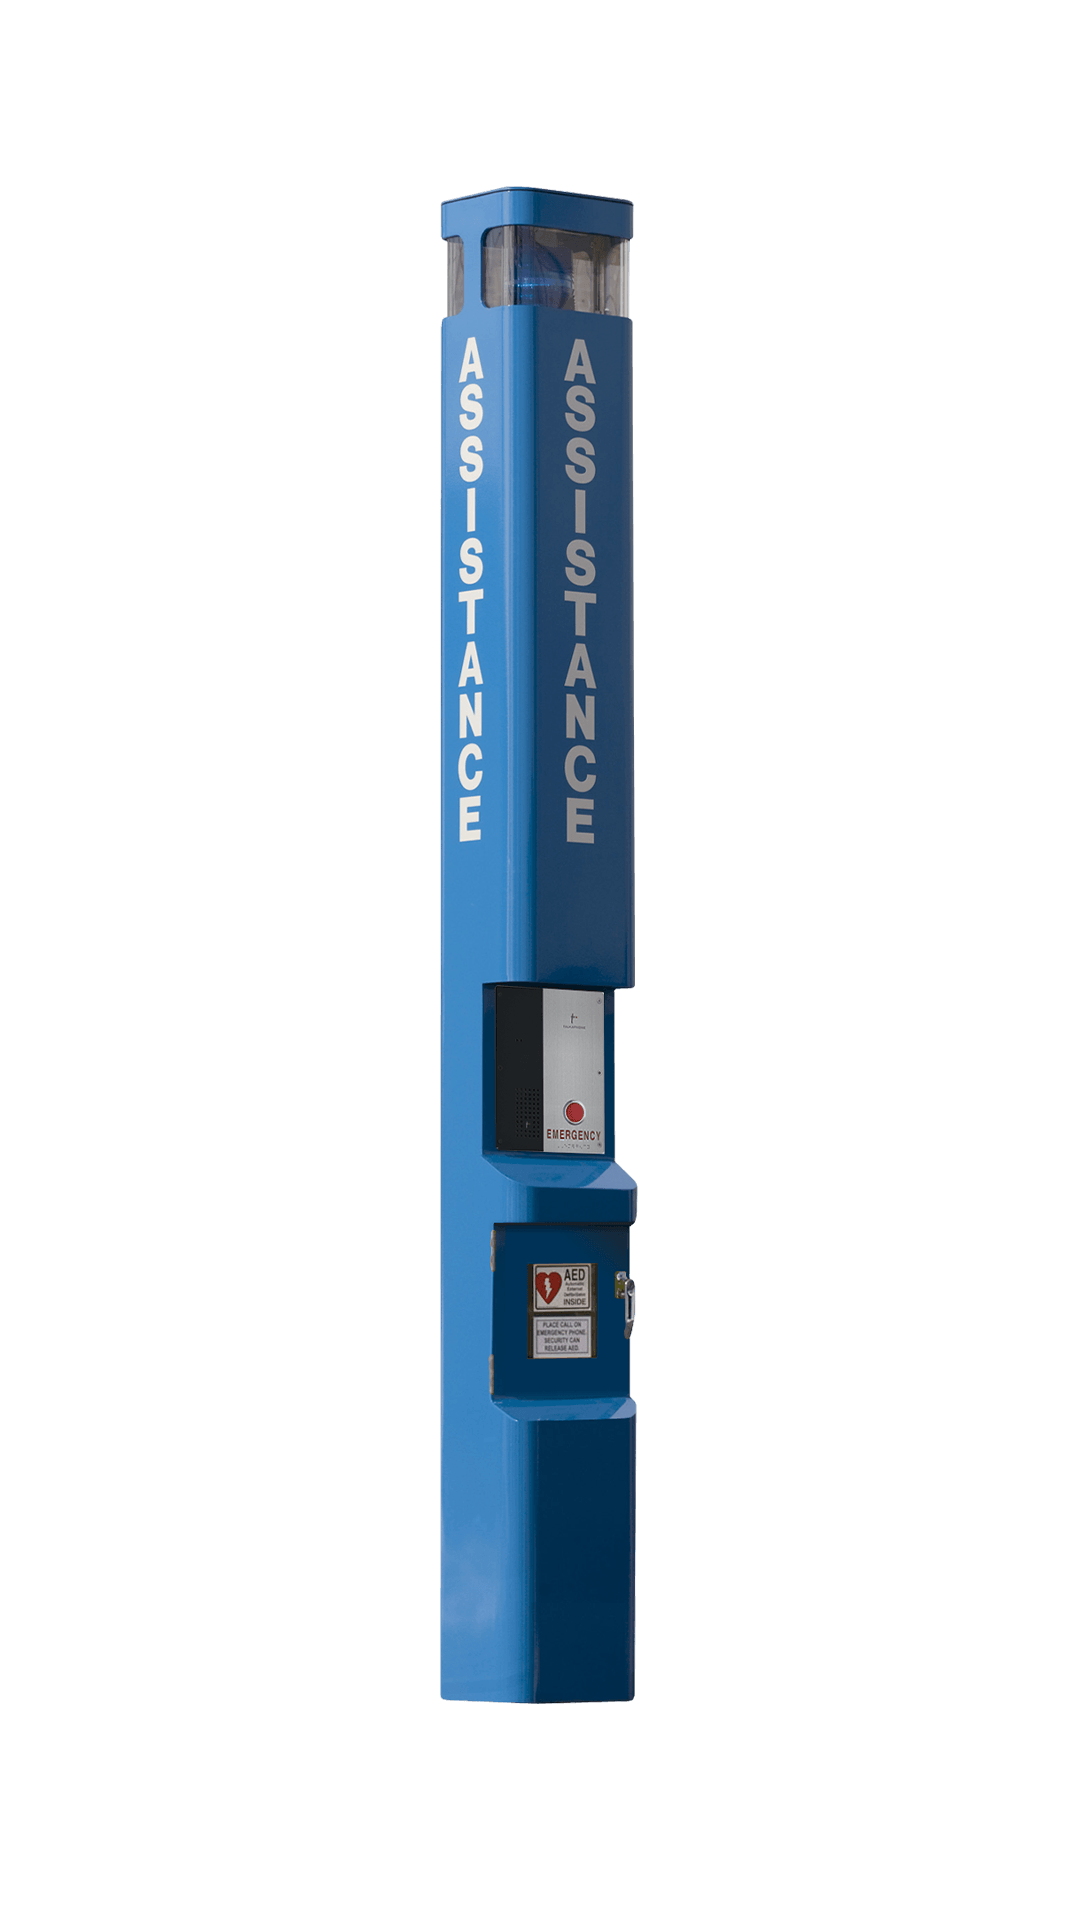 Radius Blue Light Tower with Built-in AED Compartment